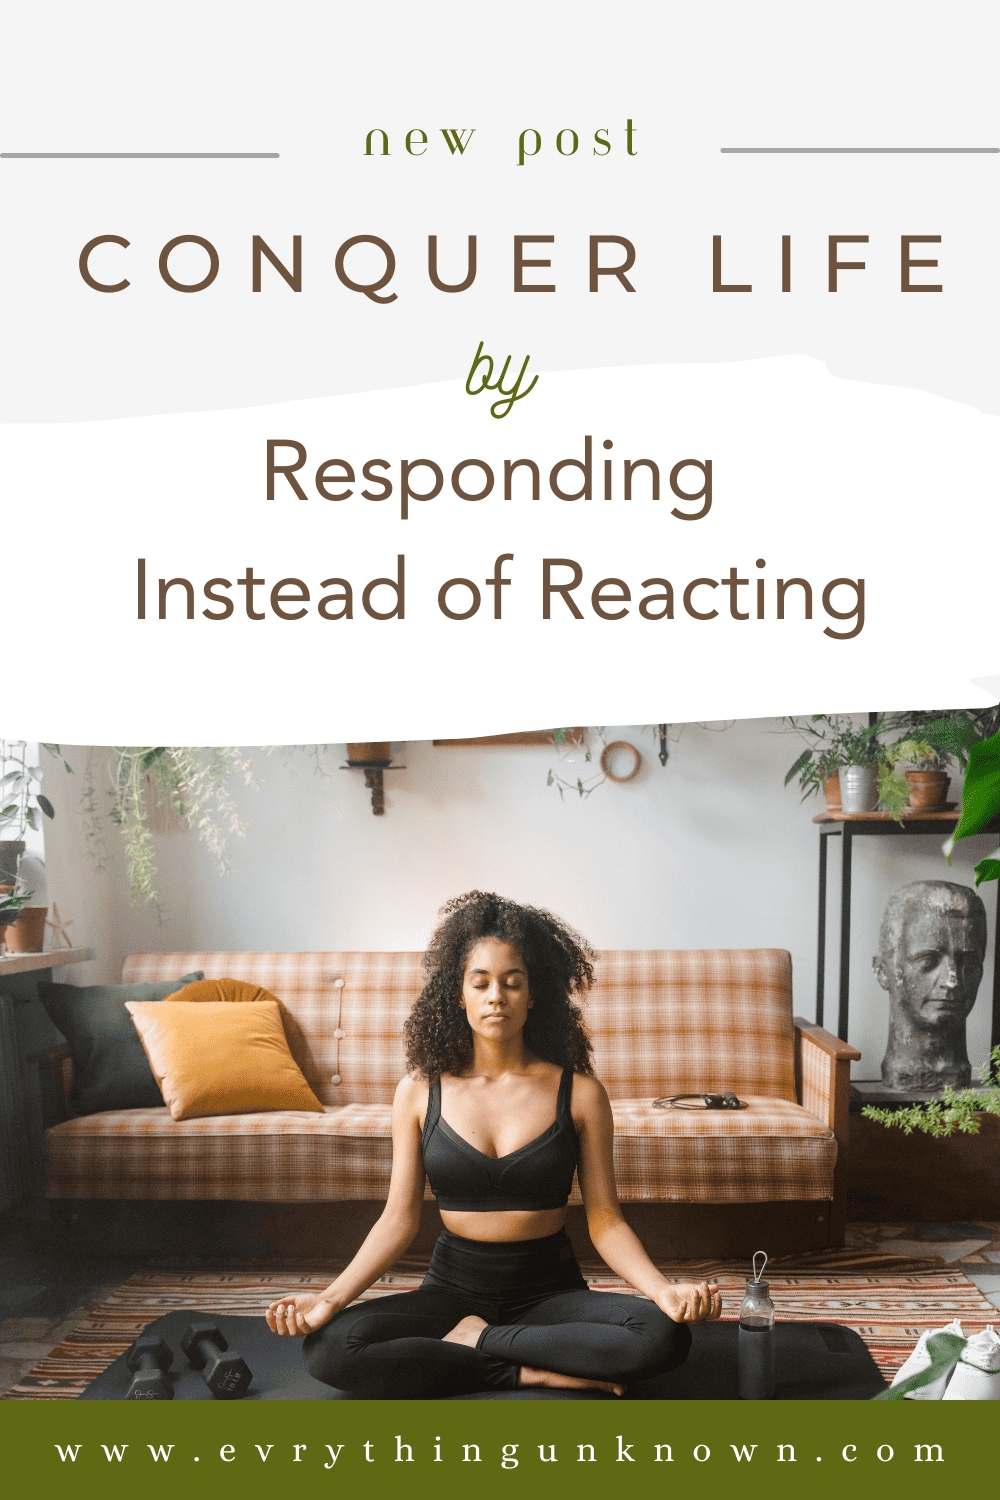 Conquer Life by Responding Instead of Reacting